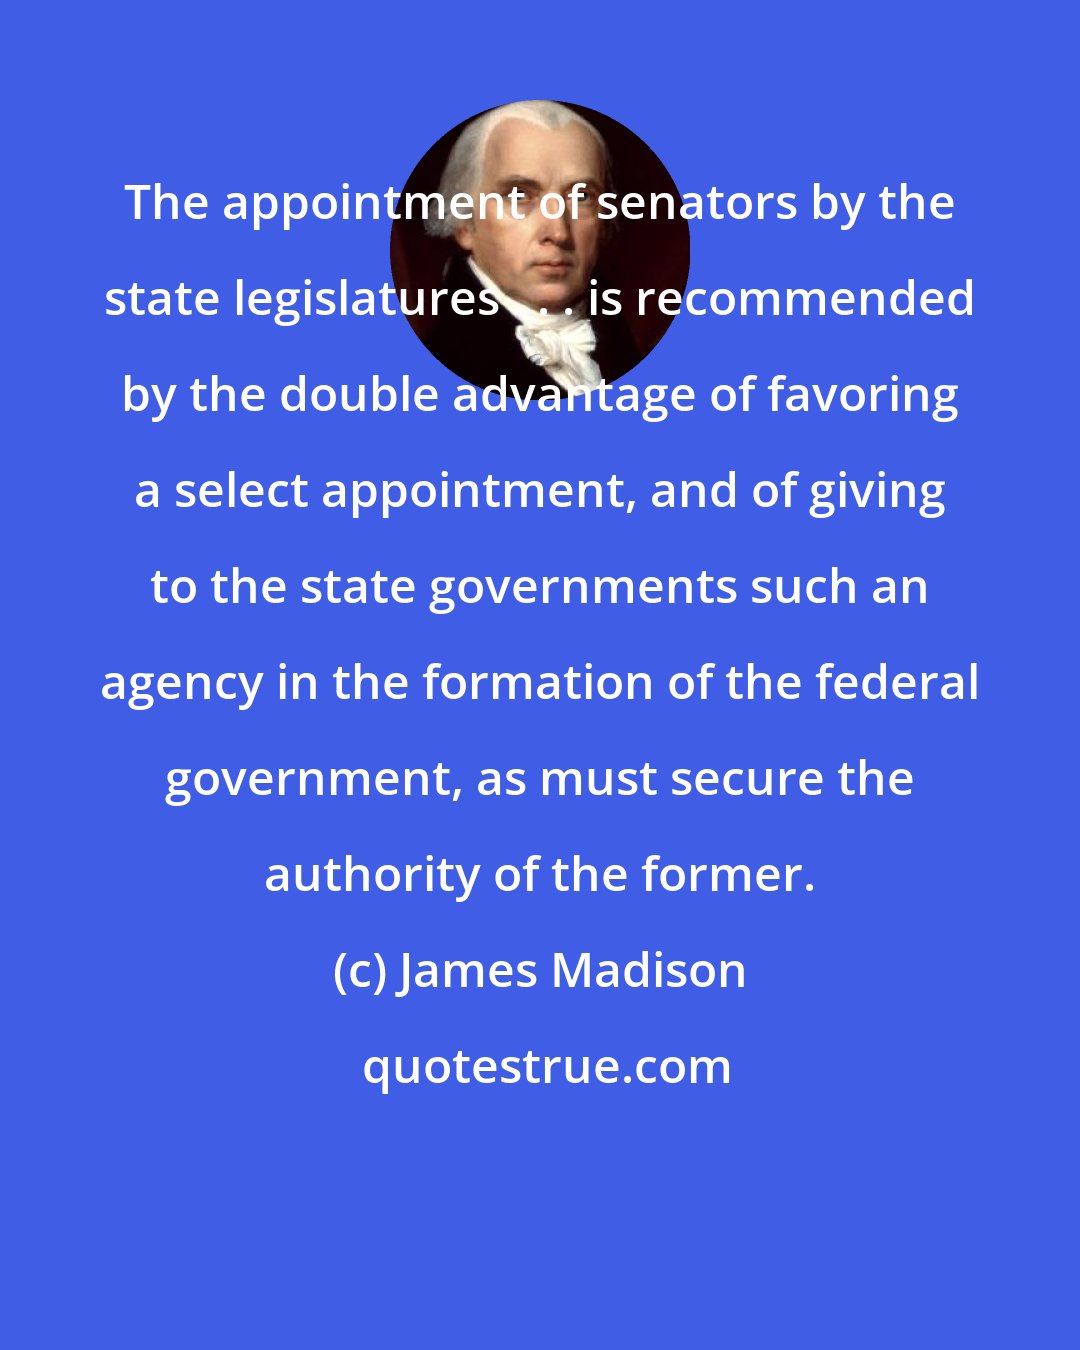 James Madison: The appointment of senators by the state legislatures . . . is recommended by the double advantage of favoring a select appointment, and of giving to the state governments such an agency in the formation of the federal government, as must secure the authority of the former.